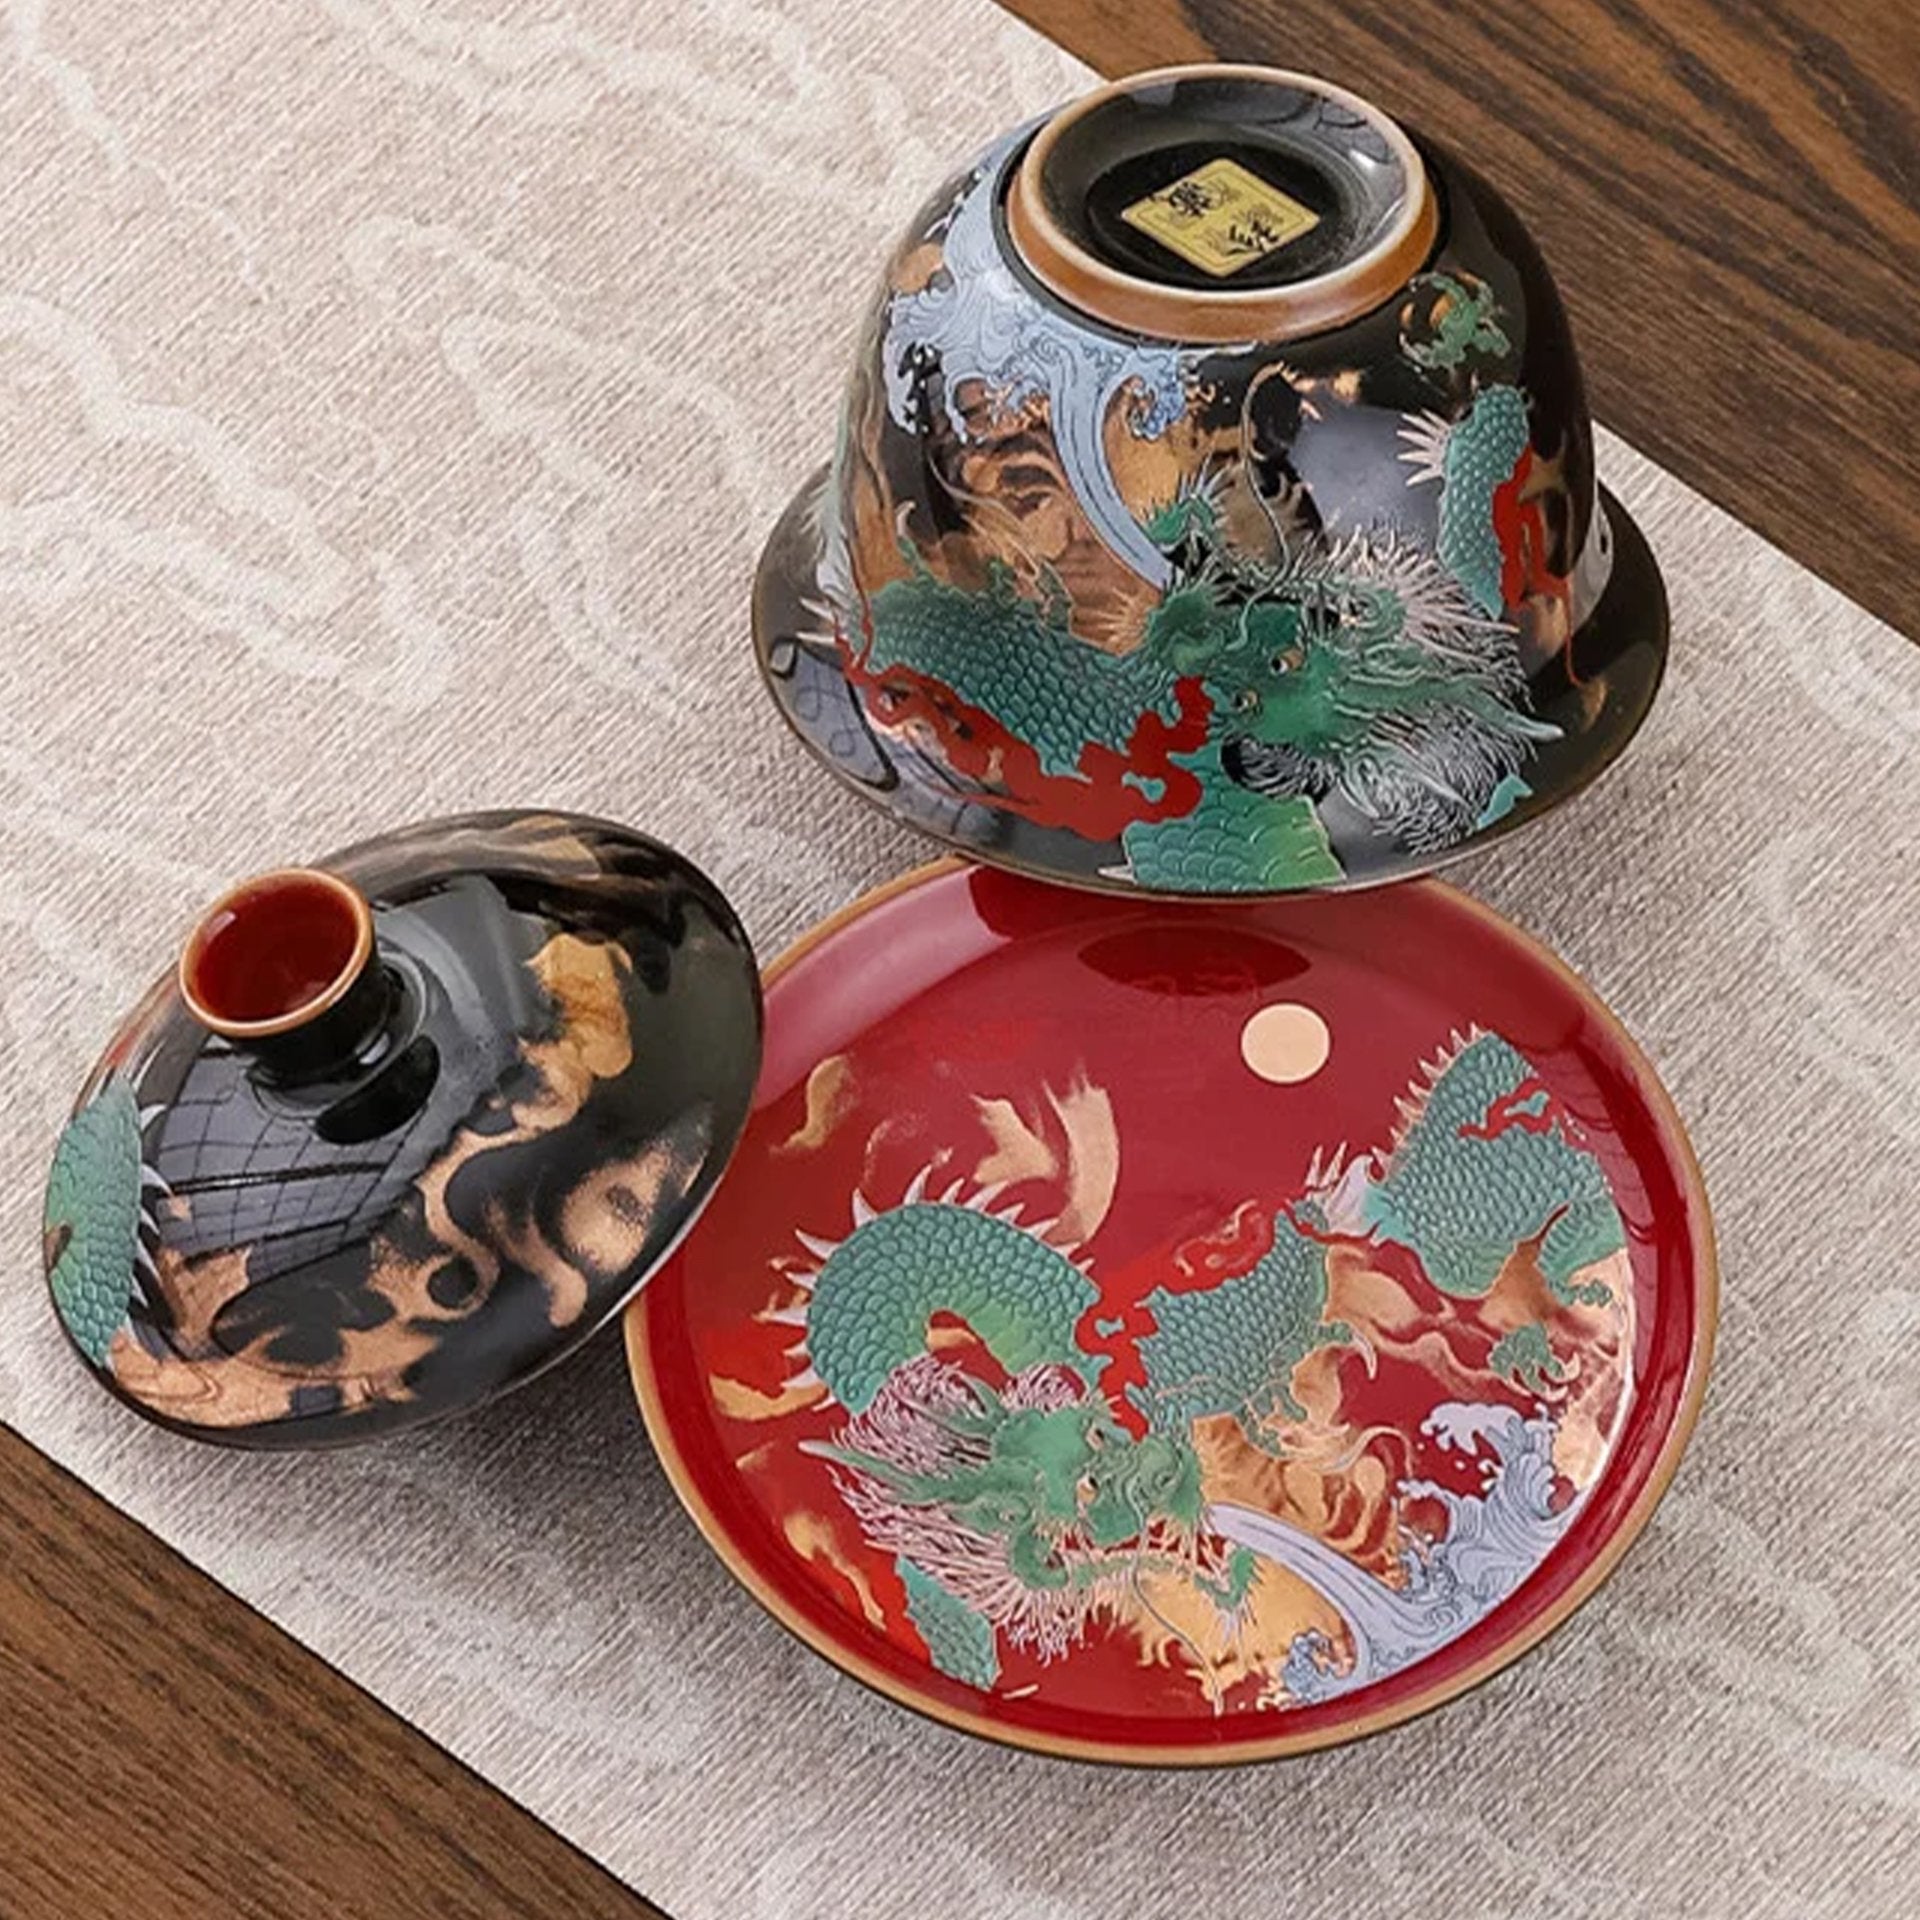 Gaiwan tea set with dragon design, viewed from above.